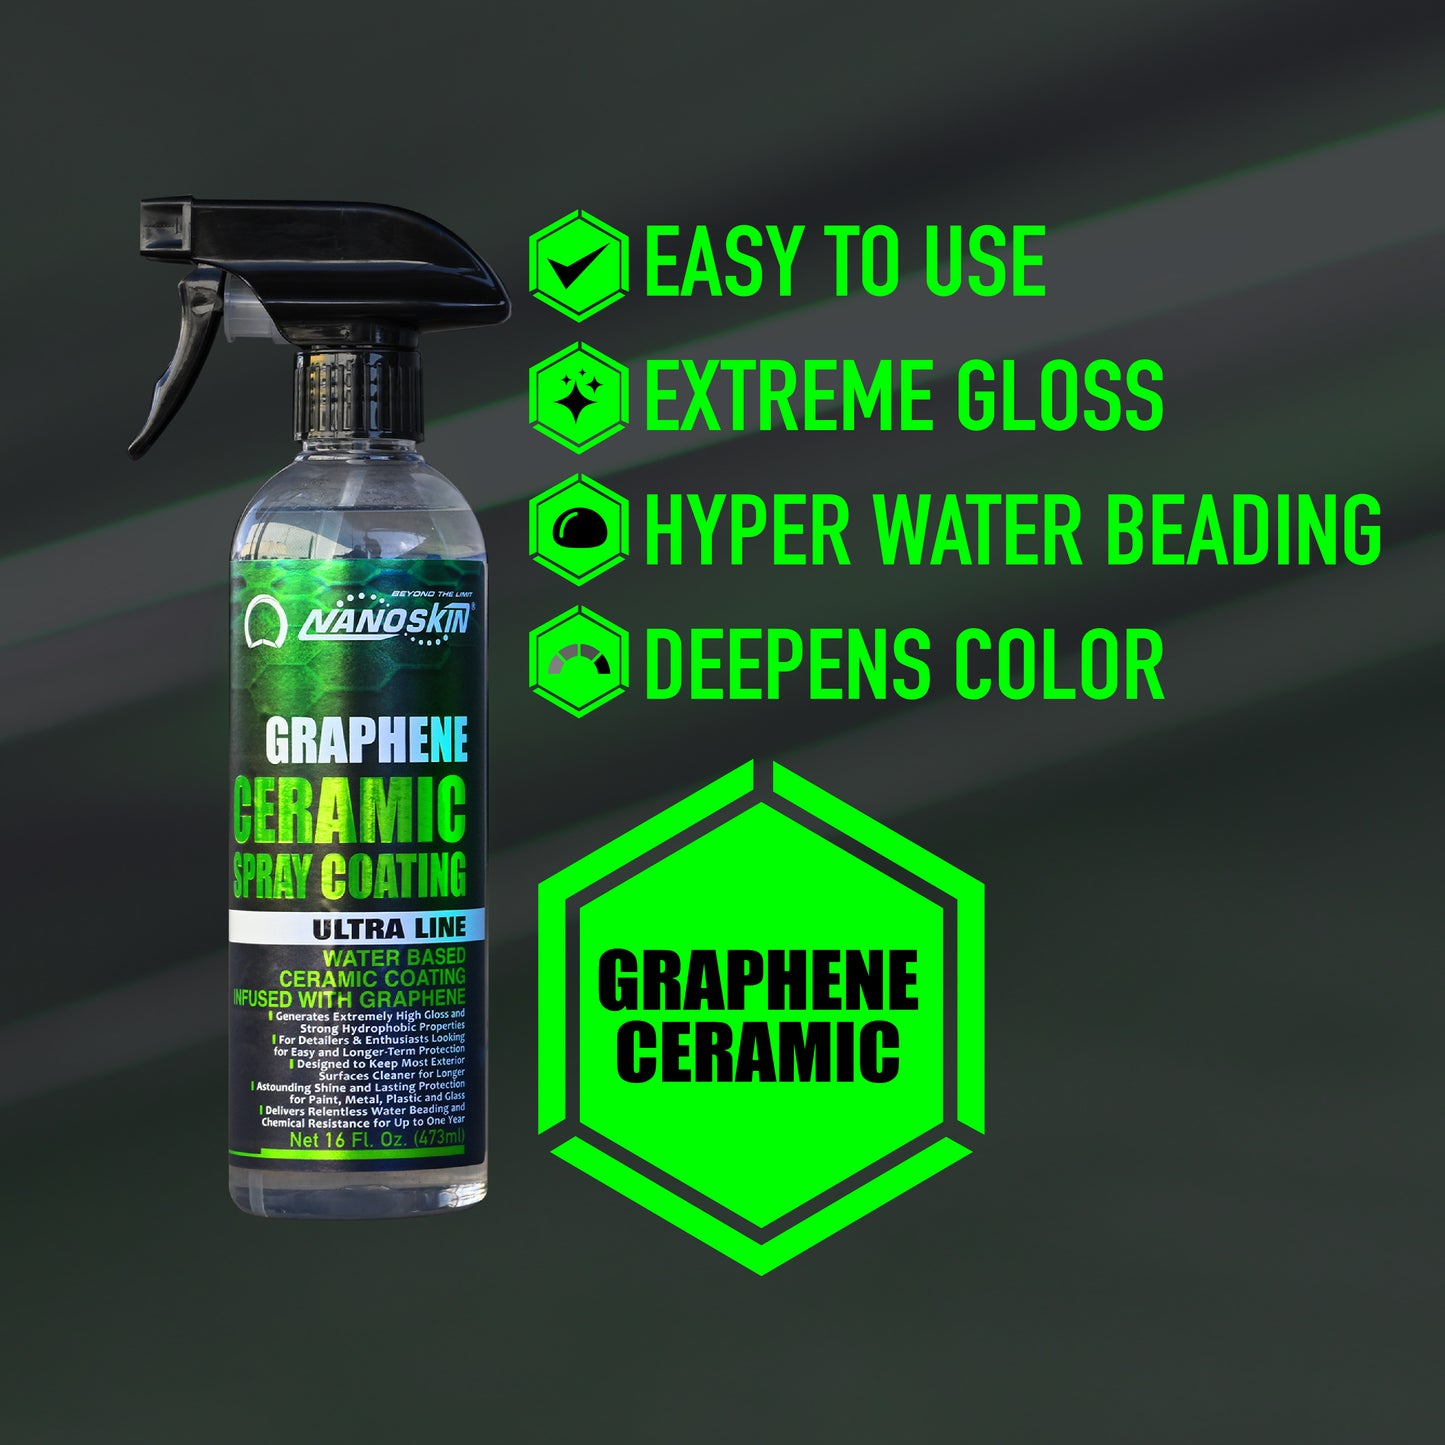 NEW PRODUCT - How To Use A Ceramic Glass Coating